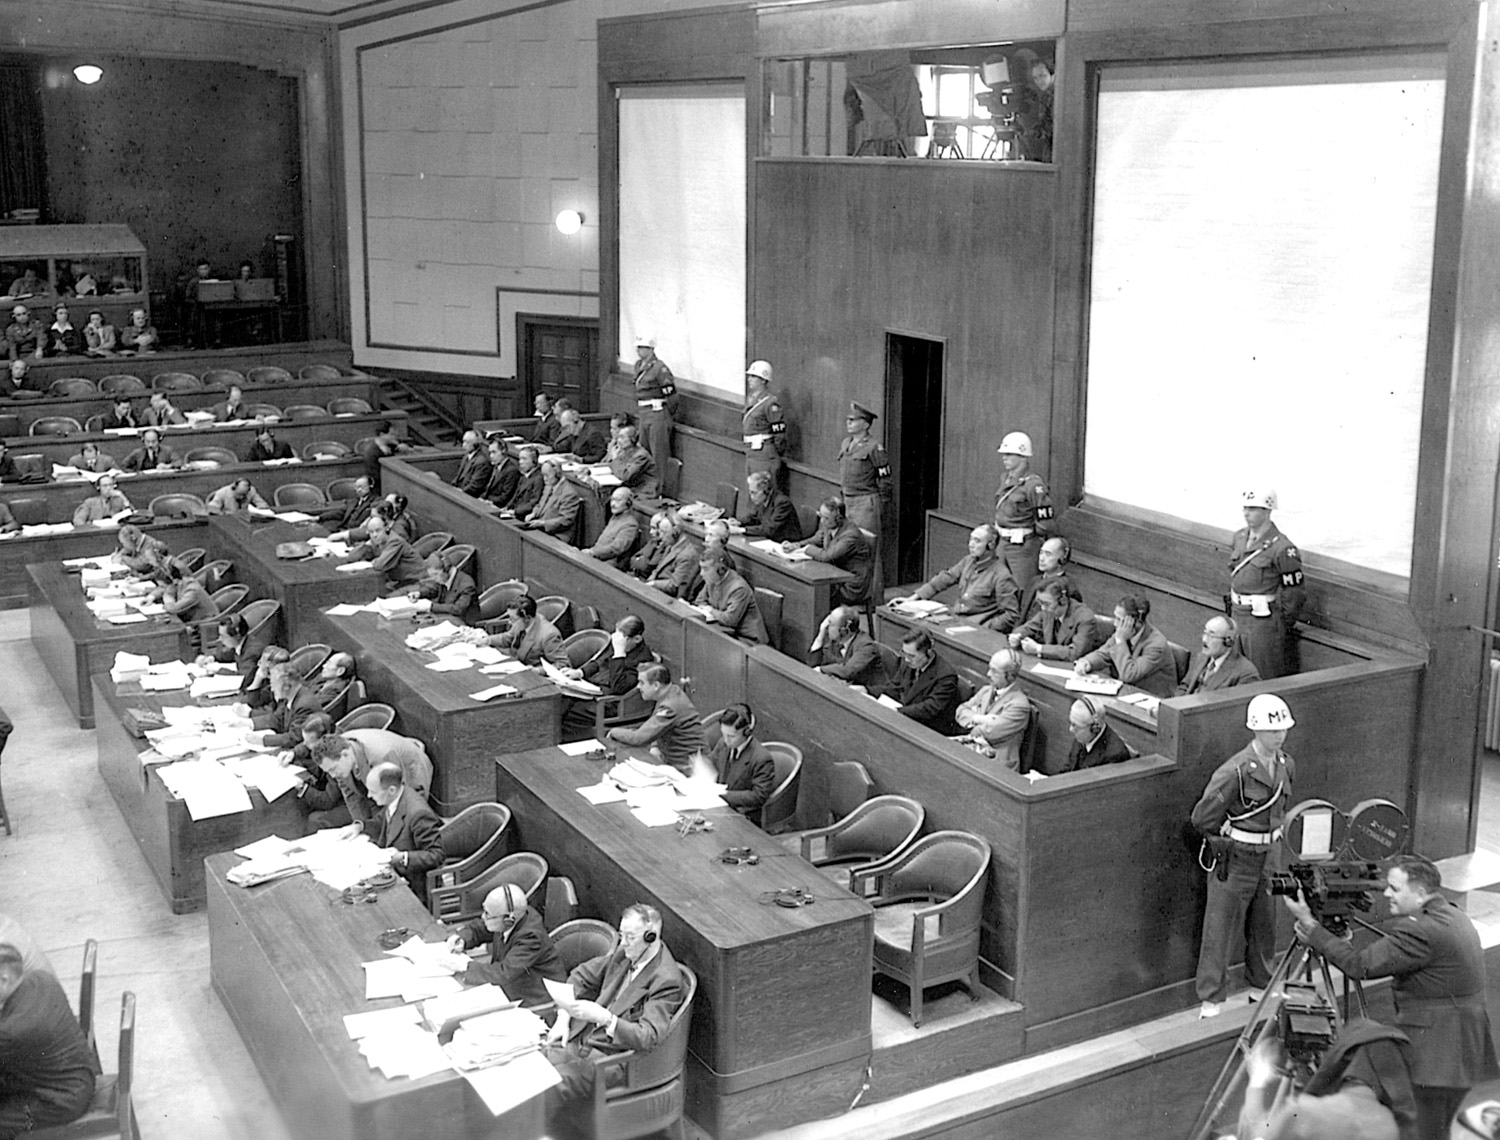 The courtroom of the War Ministry Building in Tokyo was the scene of the trial of 27 accused Japanese war criminals, including Doihara.